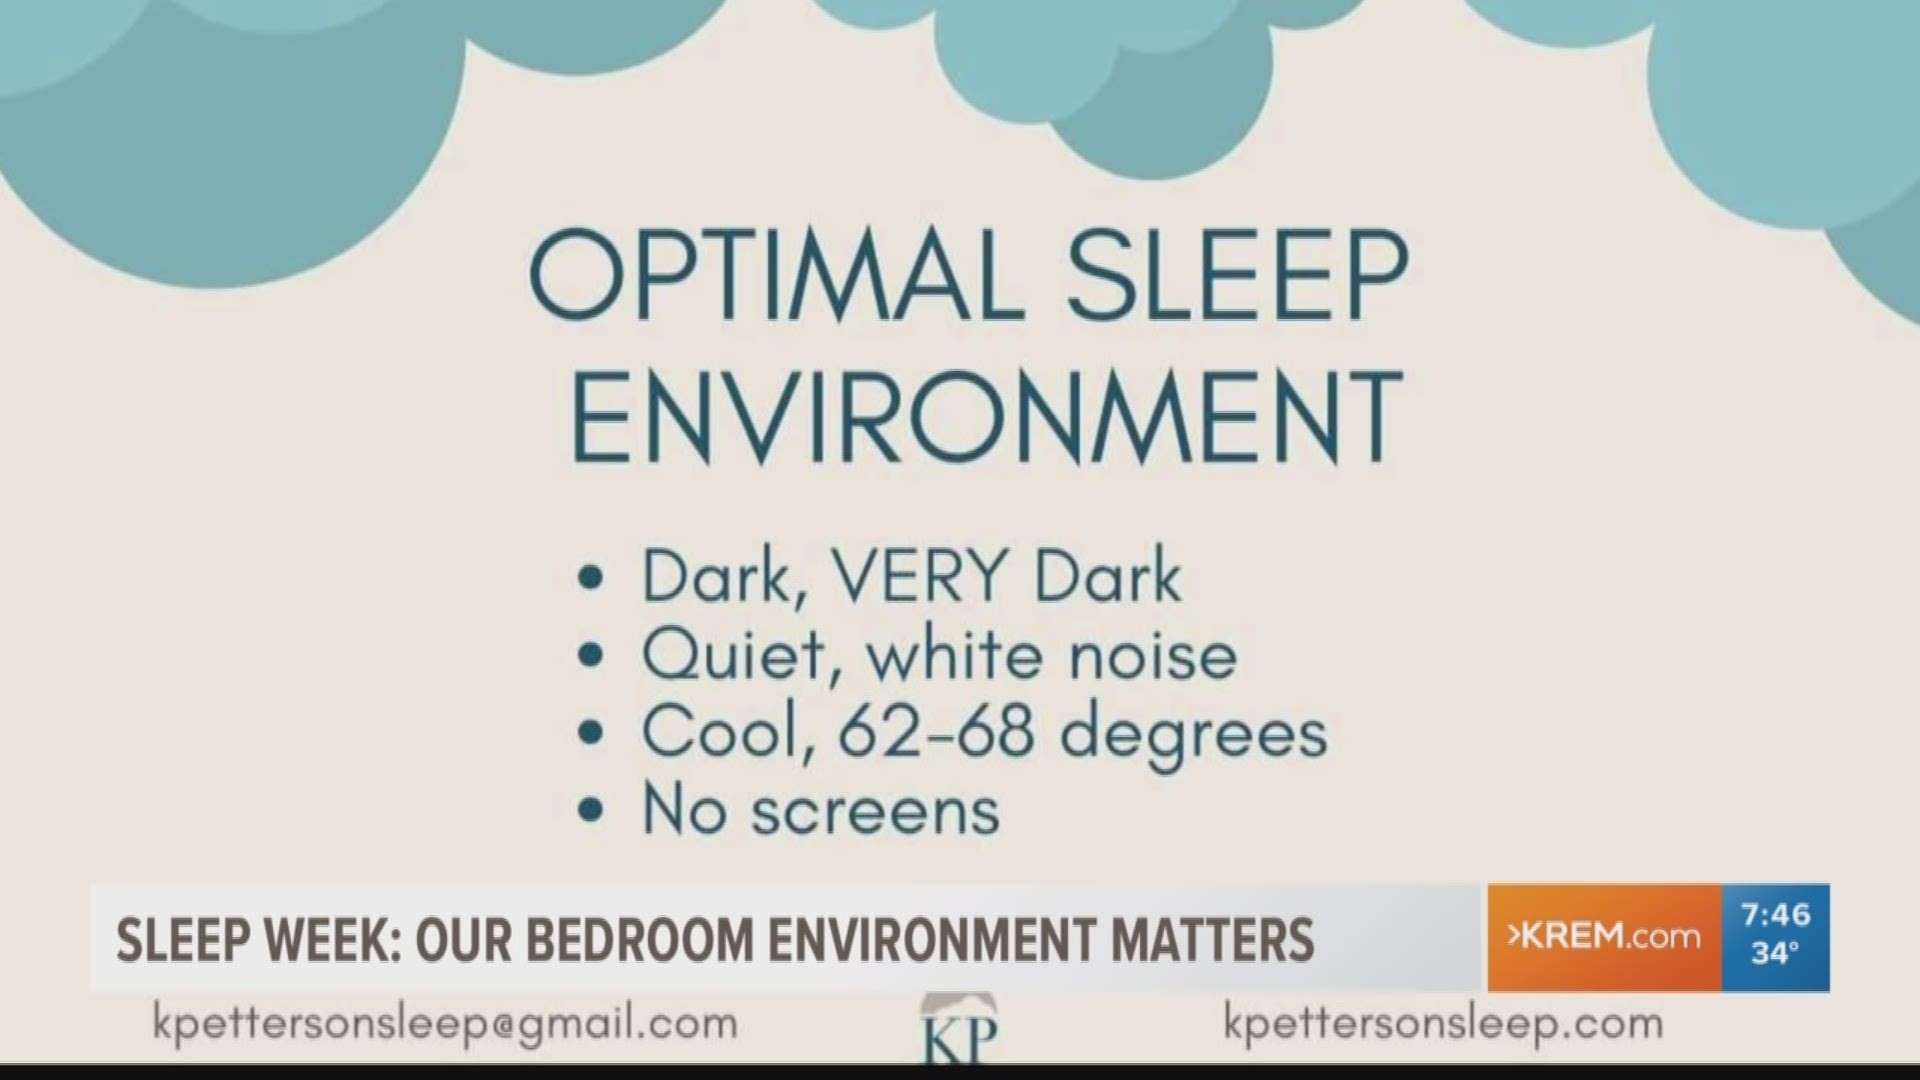 Sleep specialist Kristine Petterson tells us how our sleep environment impacts the quality of our sleep.